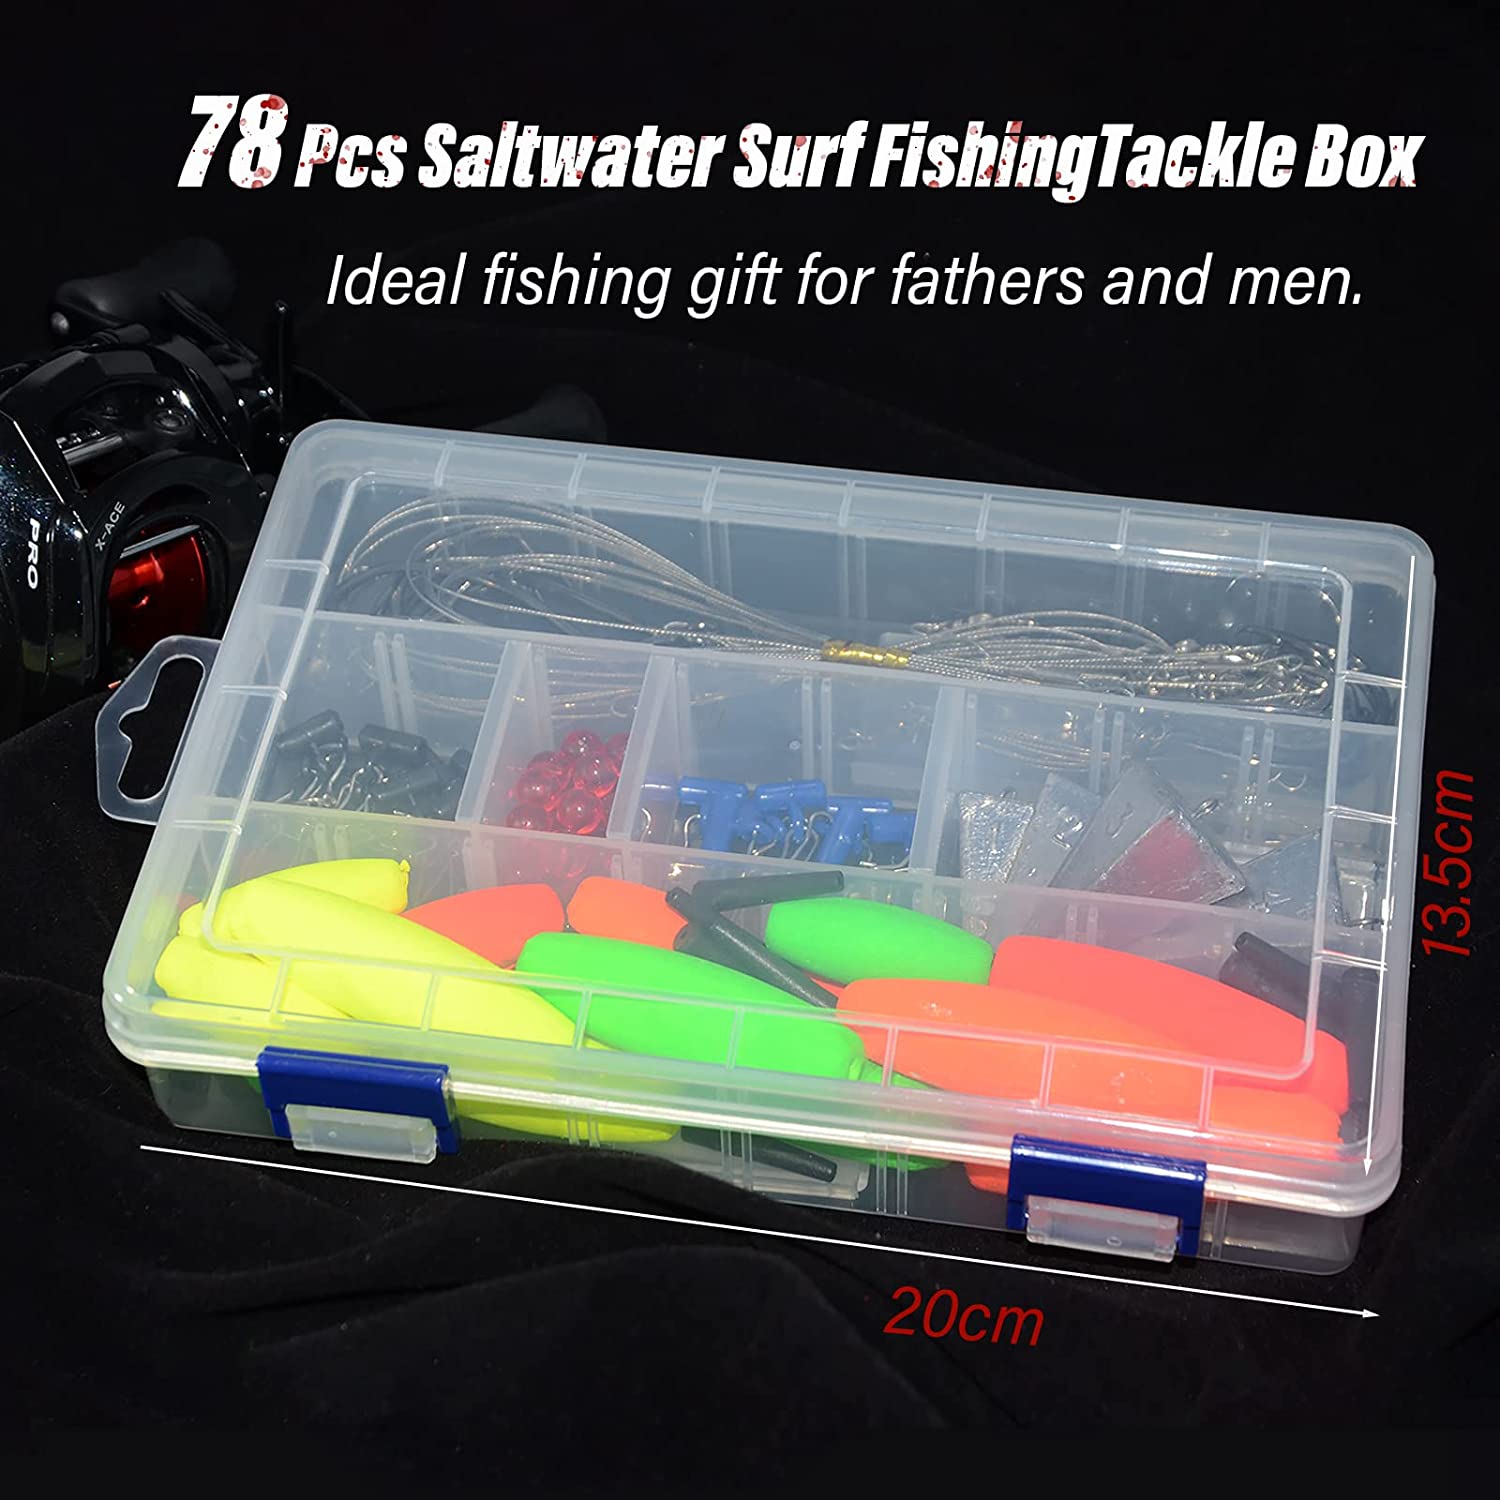 SEAOWL 78Pcs Saltwater Surf Fishing Kit Fish Finder Rig,Tackle Box Included Fishing Hooks Rig Floats Pyramid Sinker Weights Sinker Slider Beads for Salt Beach Gear Equipment